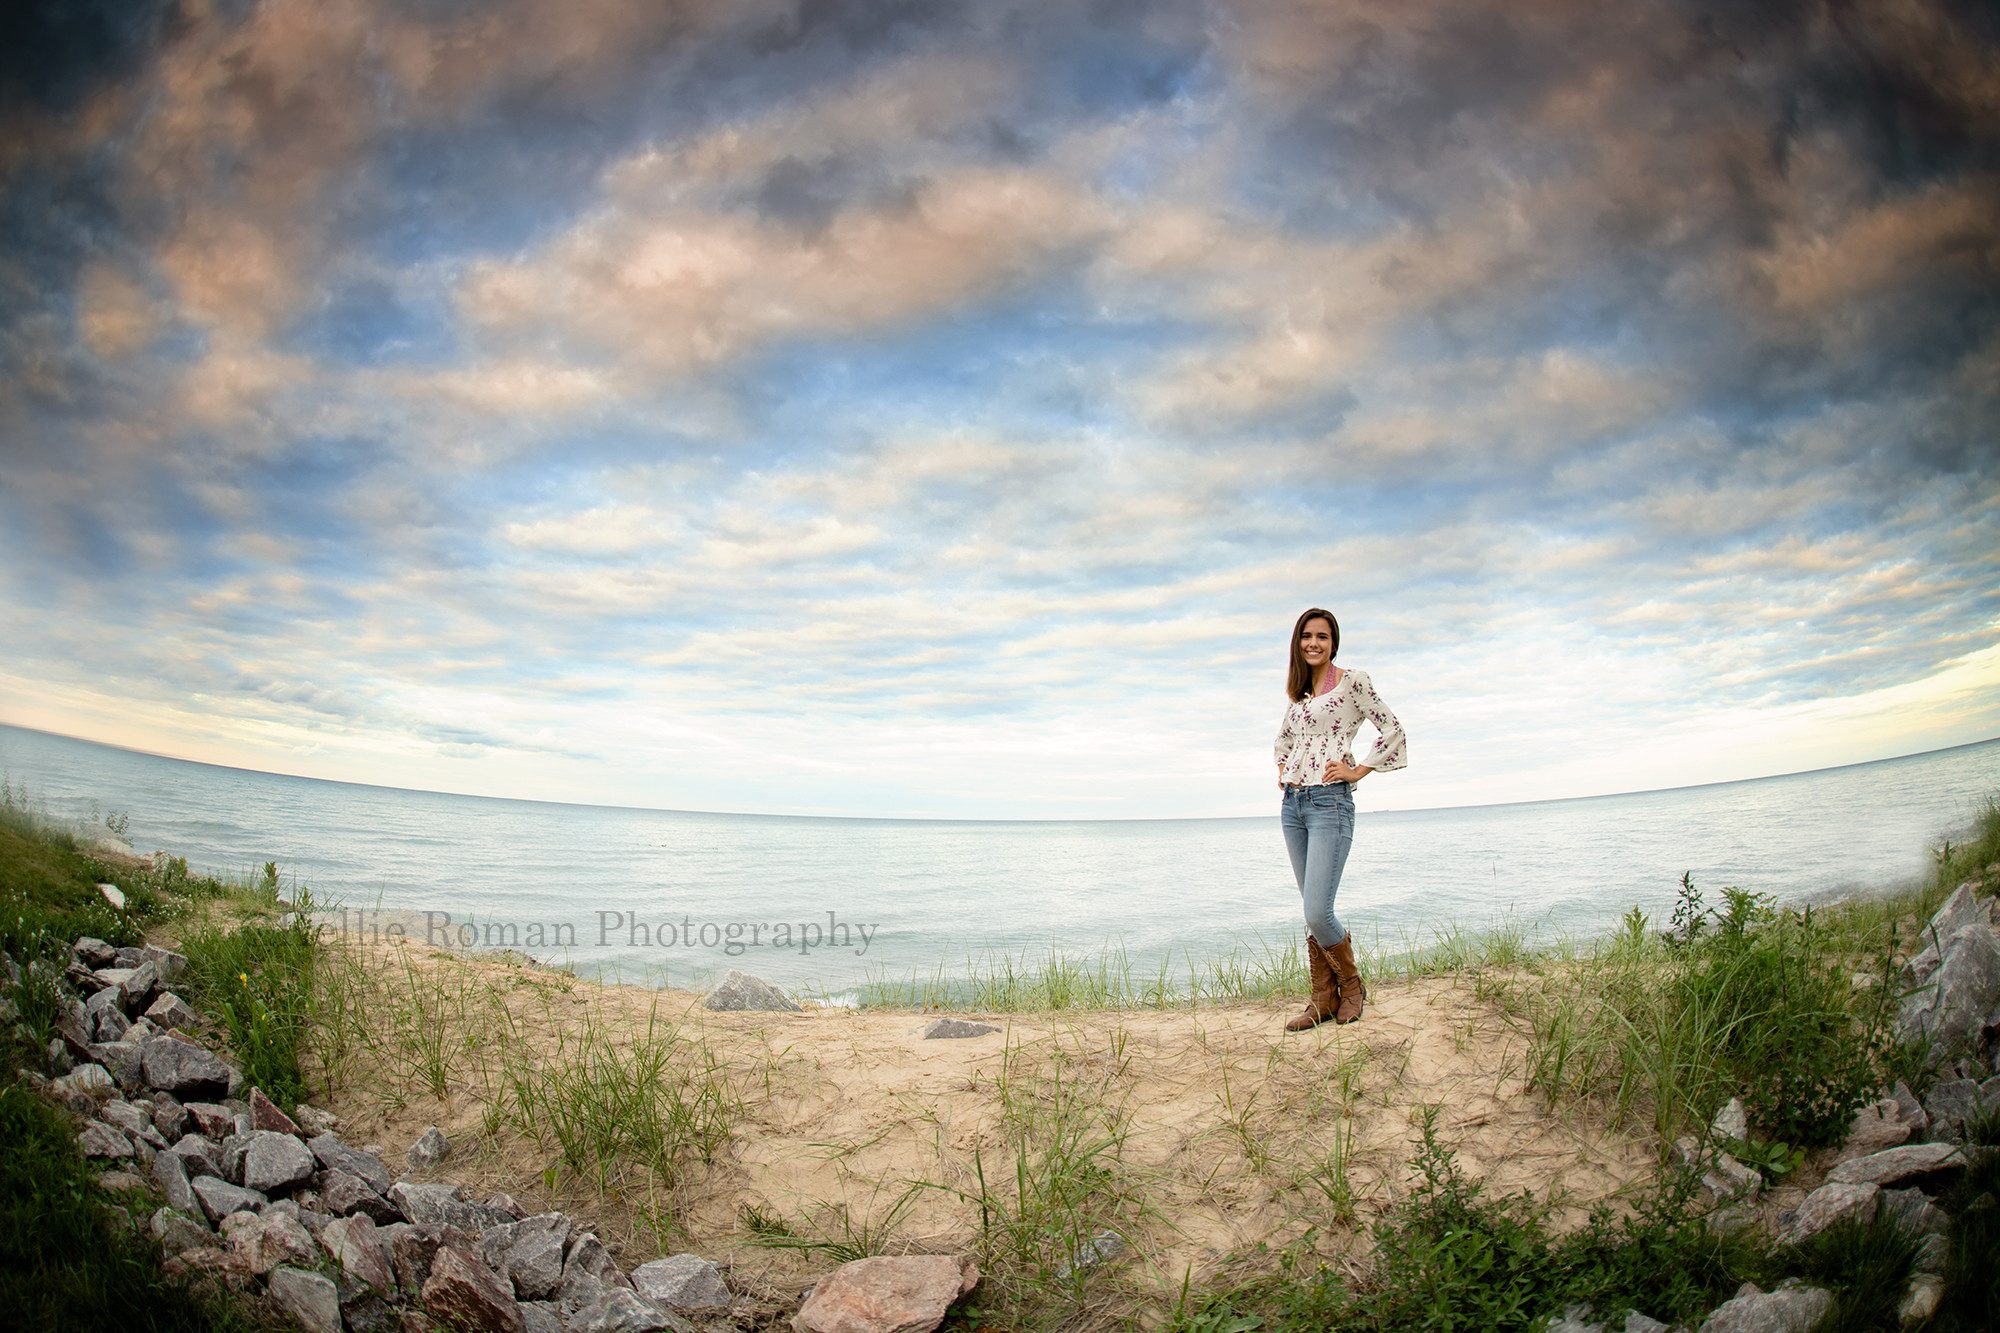 lighthouse senior pics a girl standing on a sand dune with Lake Michigan behind her the sky has very dramatic clouds with shades of colors